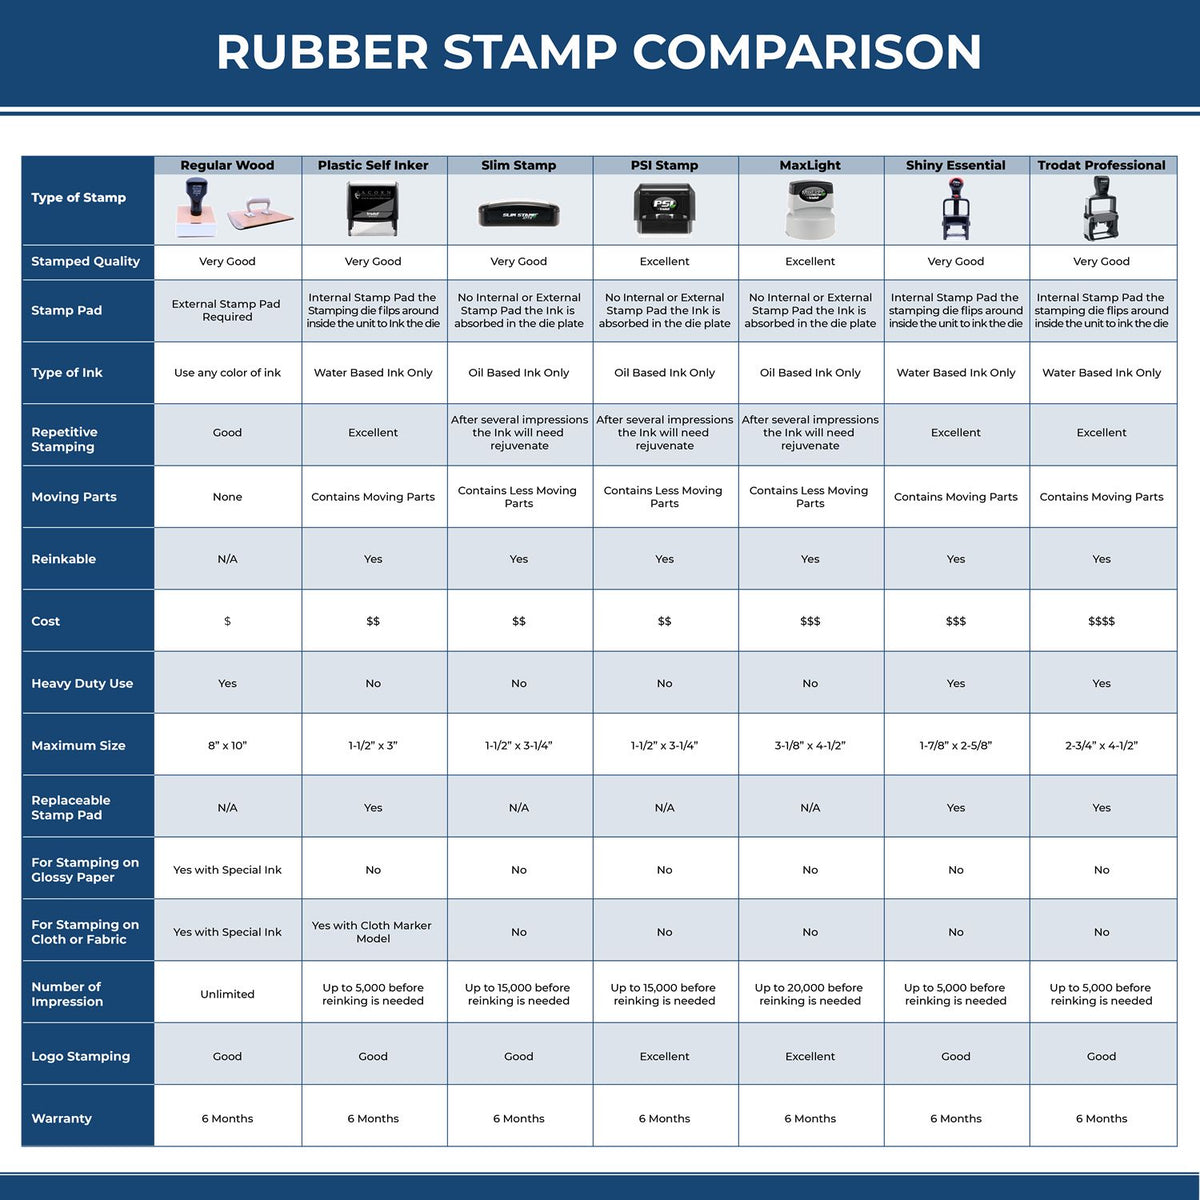 A comparison chart for the different types of mount models available for the Premium MaxLight Pre-Inked Alaska Engineering Stamp.